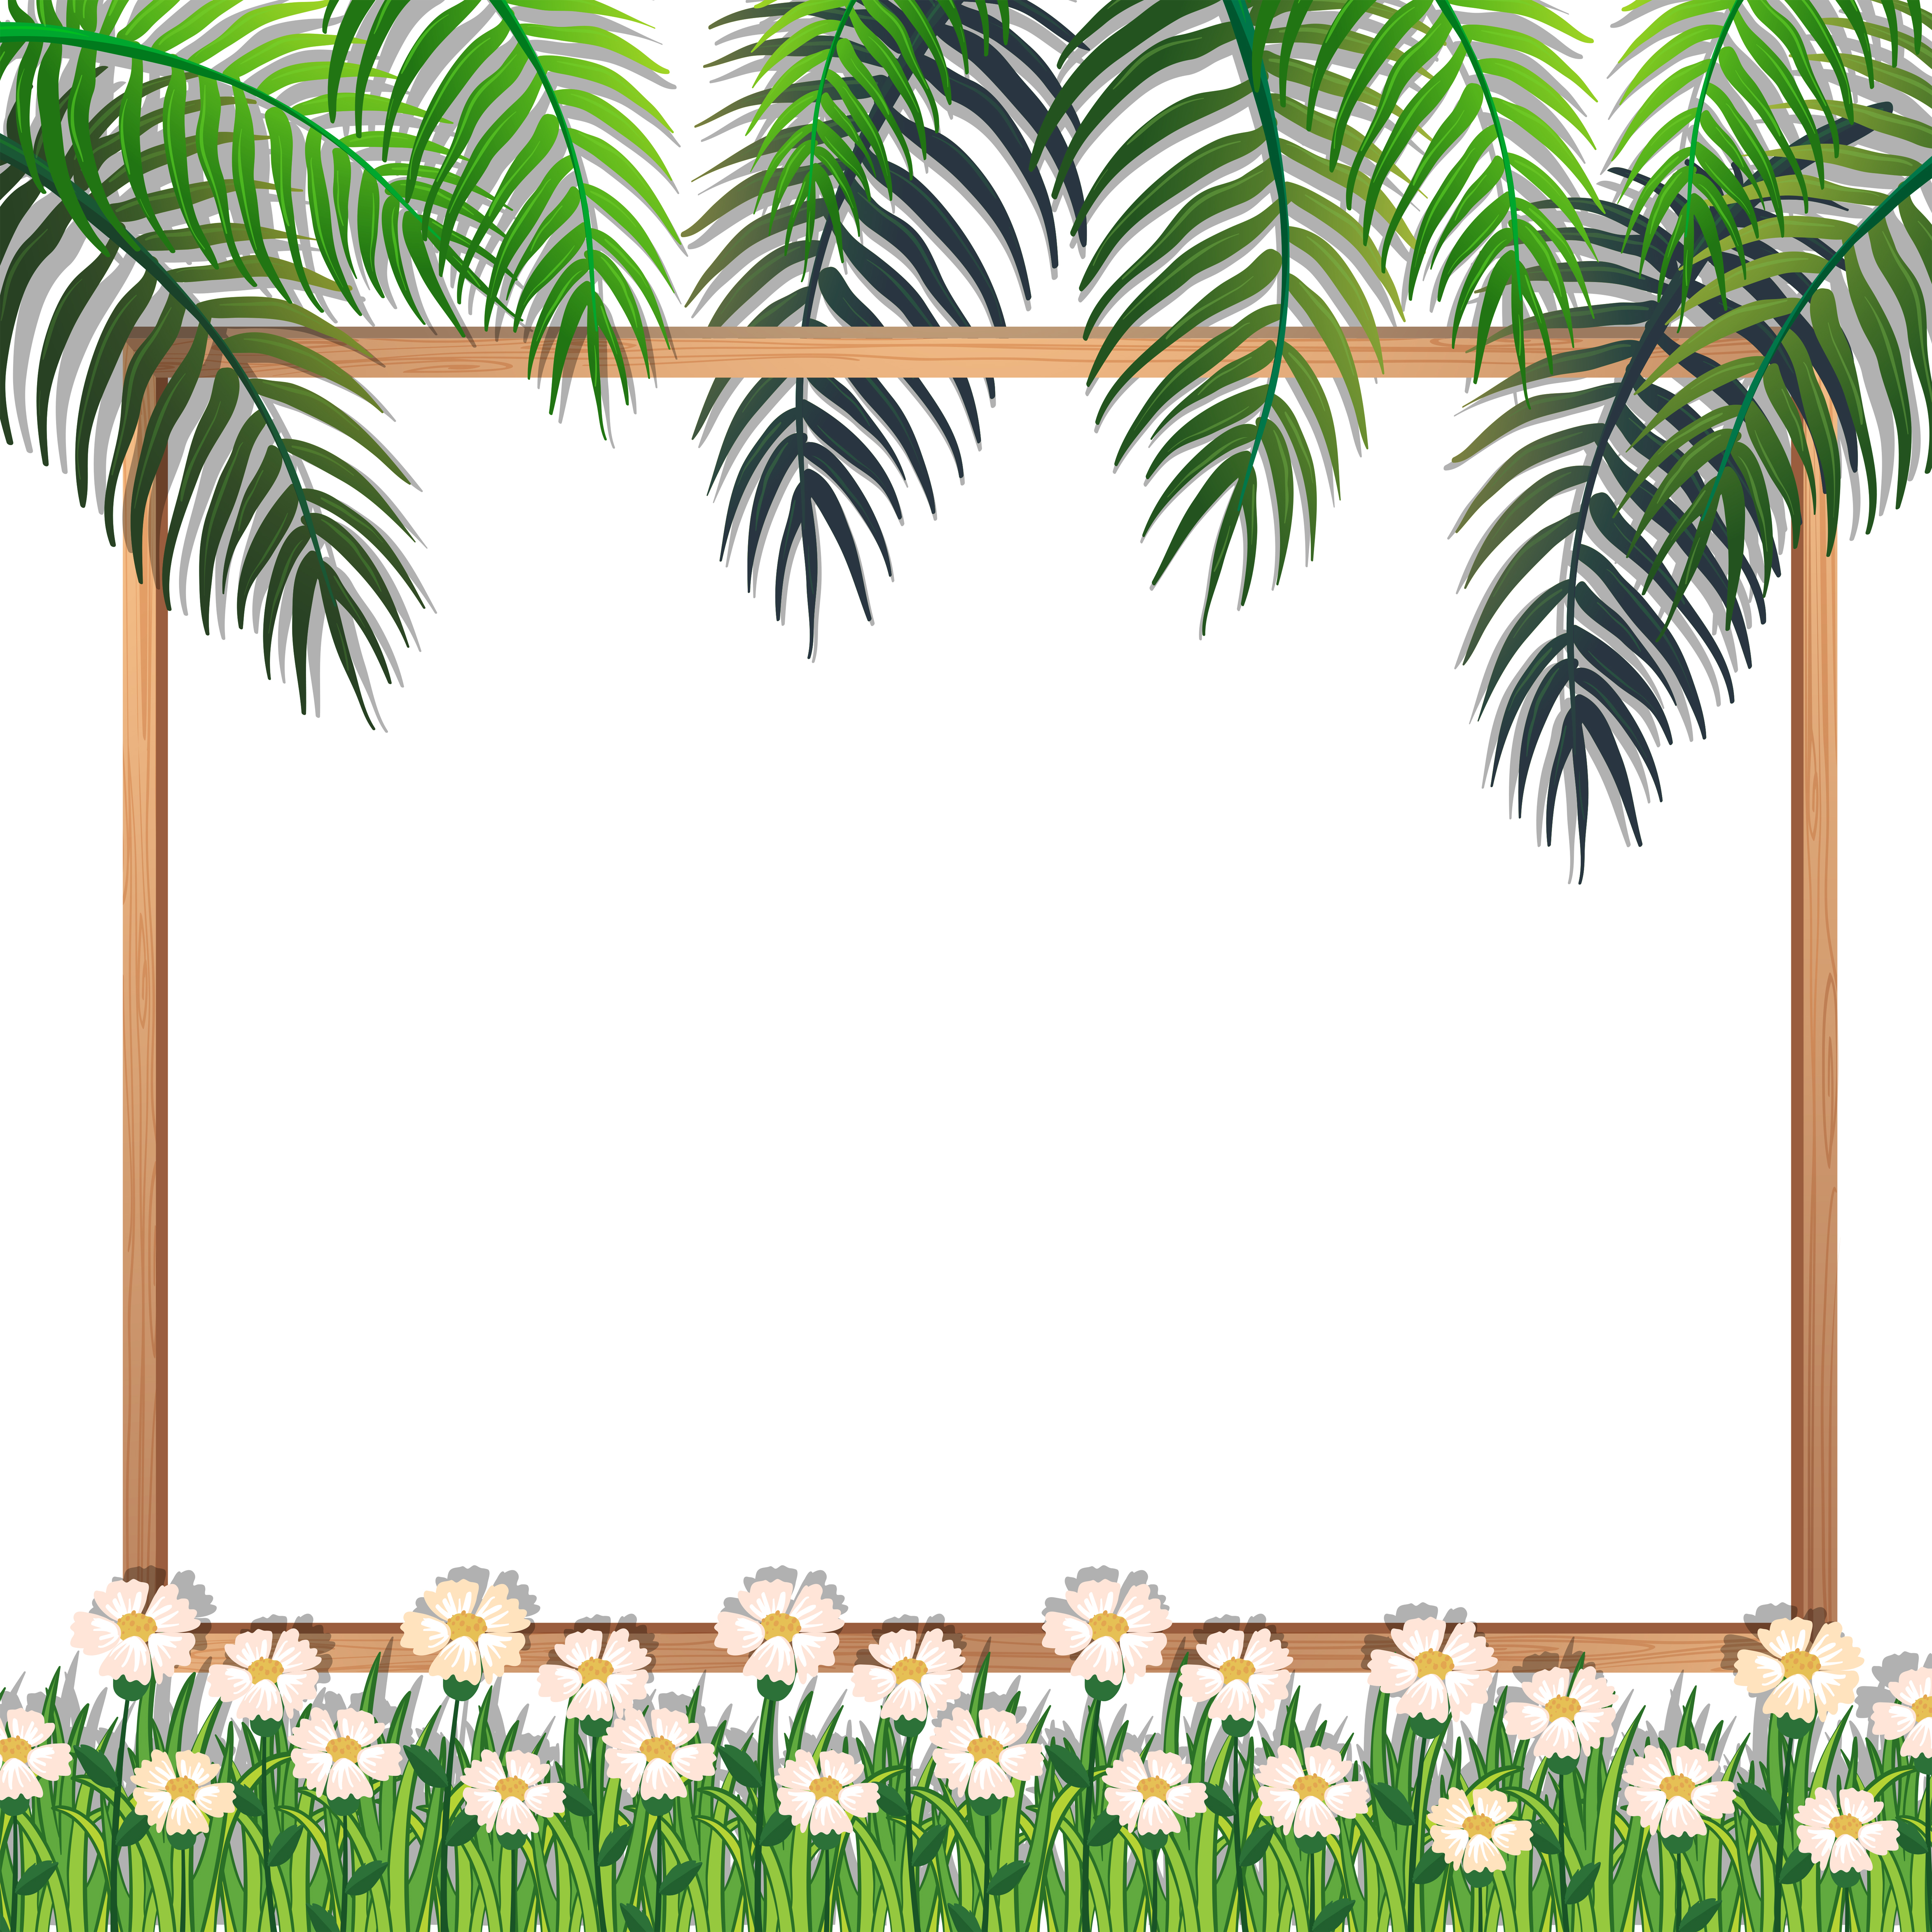  Nature  Frame  with Flowers and Leaf Download Free  Vectors 